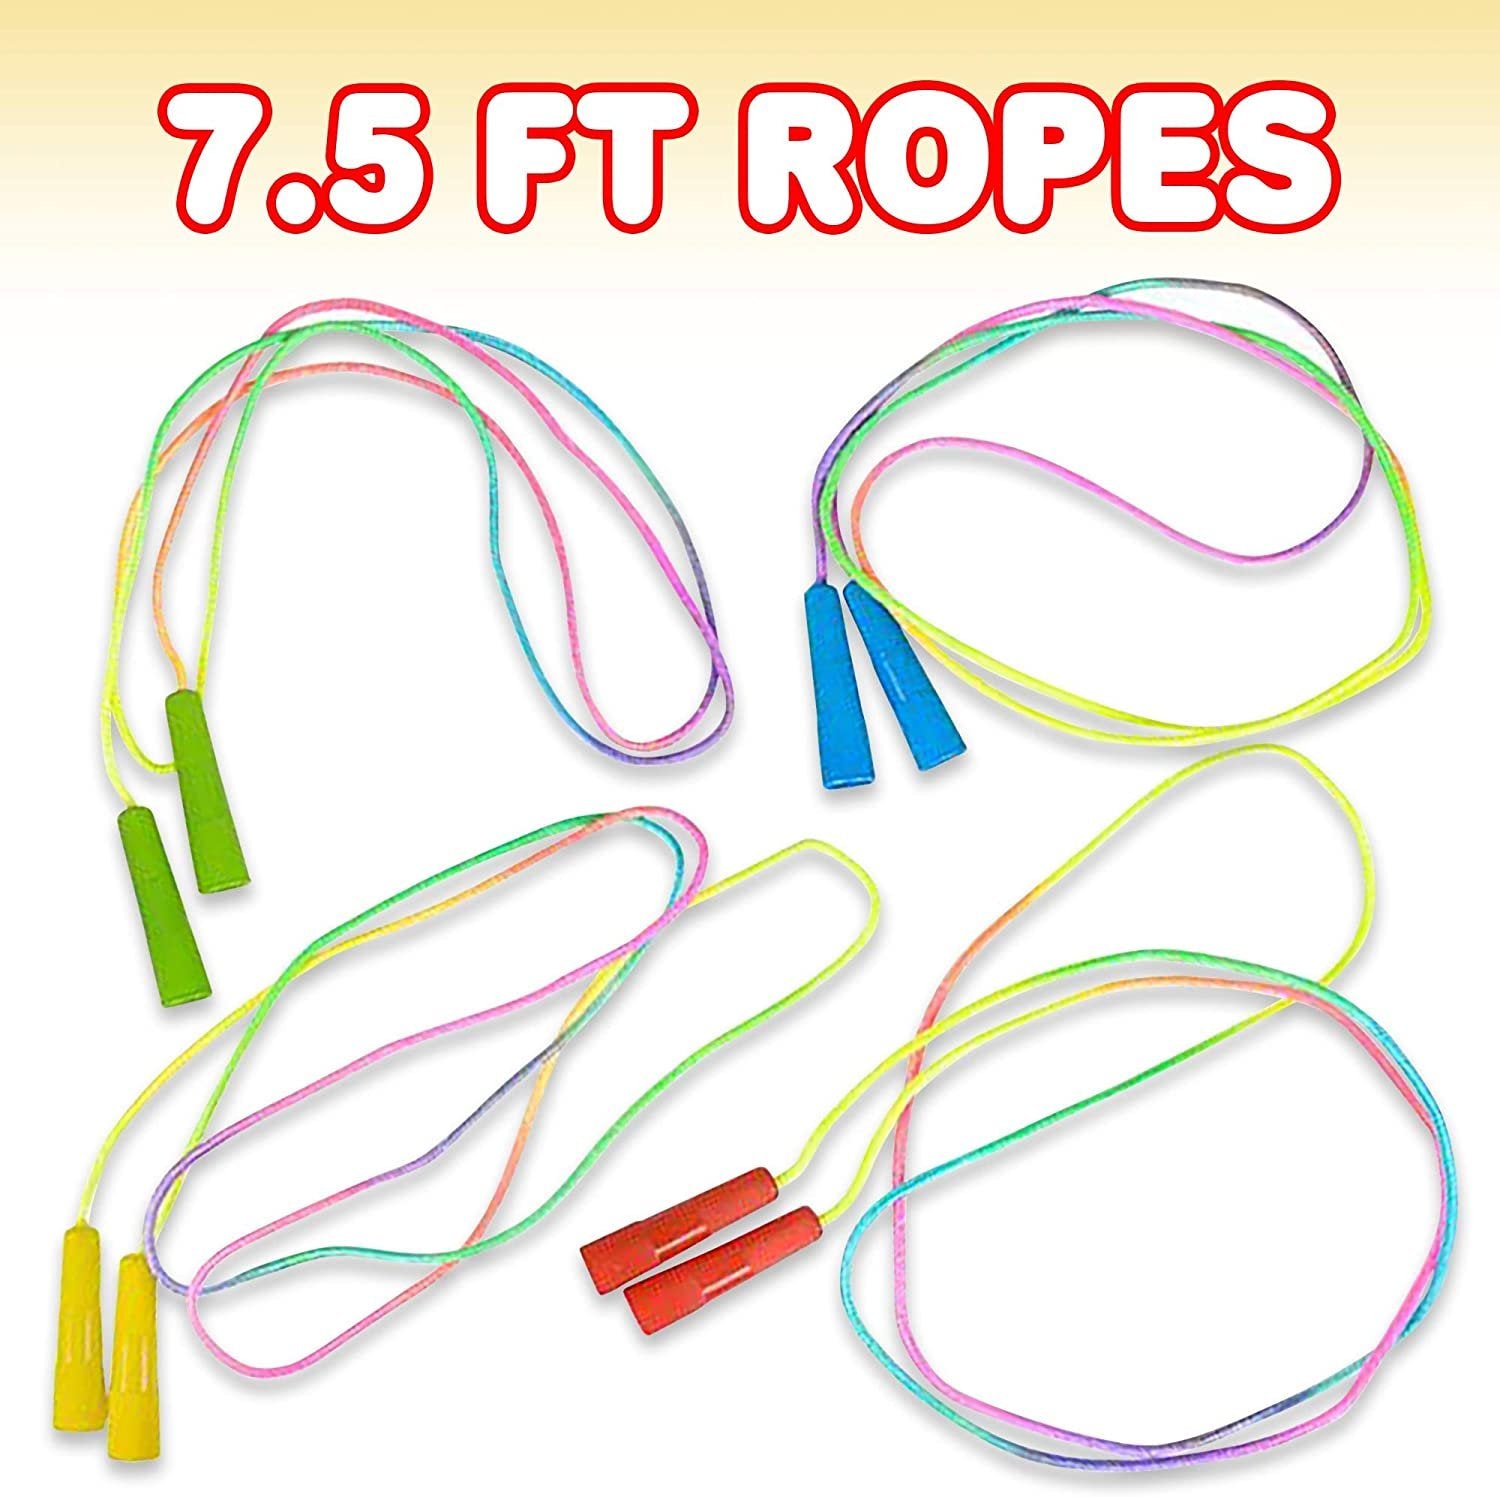 ArtCreativity 7.5ft Rainbow Jump Rope Set - 12 Pack - Vibrant Jumping Ropes for Kids - Durable Nylon Skipping Ropes - Great Birthday Party Favors, Goodie Bag Fillers, Gift Idea for Boys and Girls